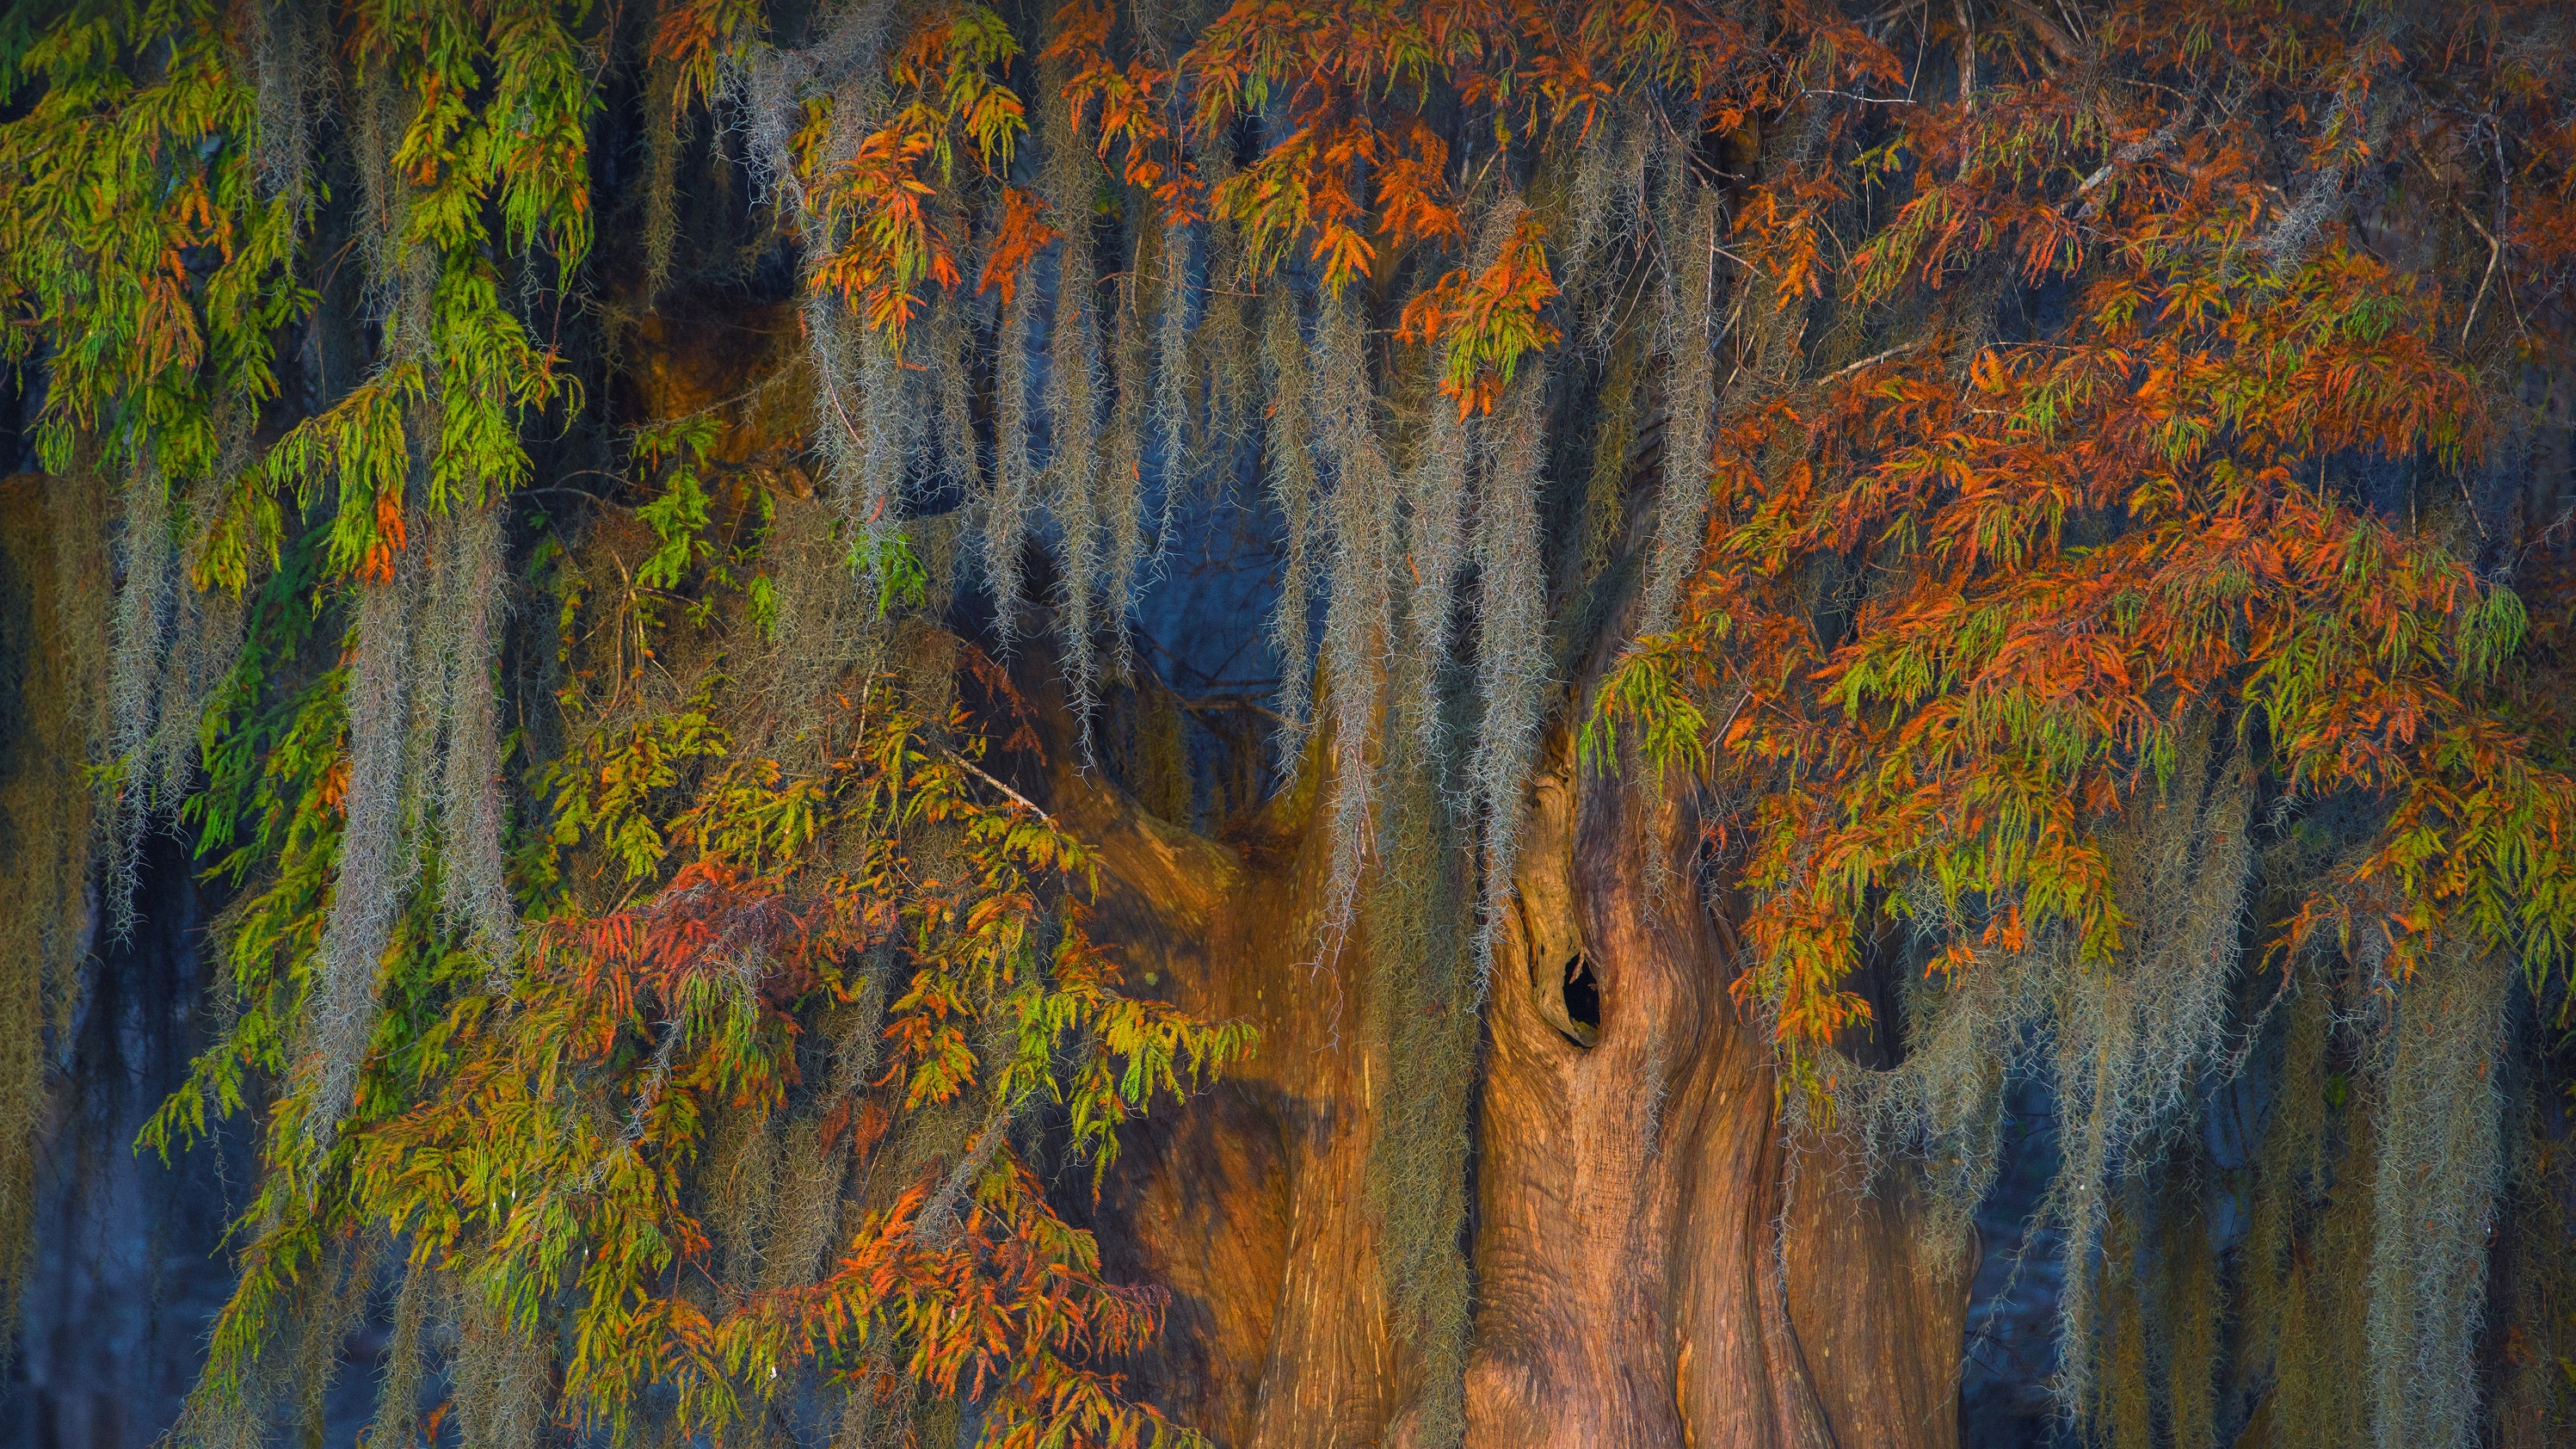 Bald cypress and Spanish moss in the Atchafalaya Basin, Louisiana by Chris Moore